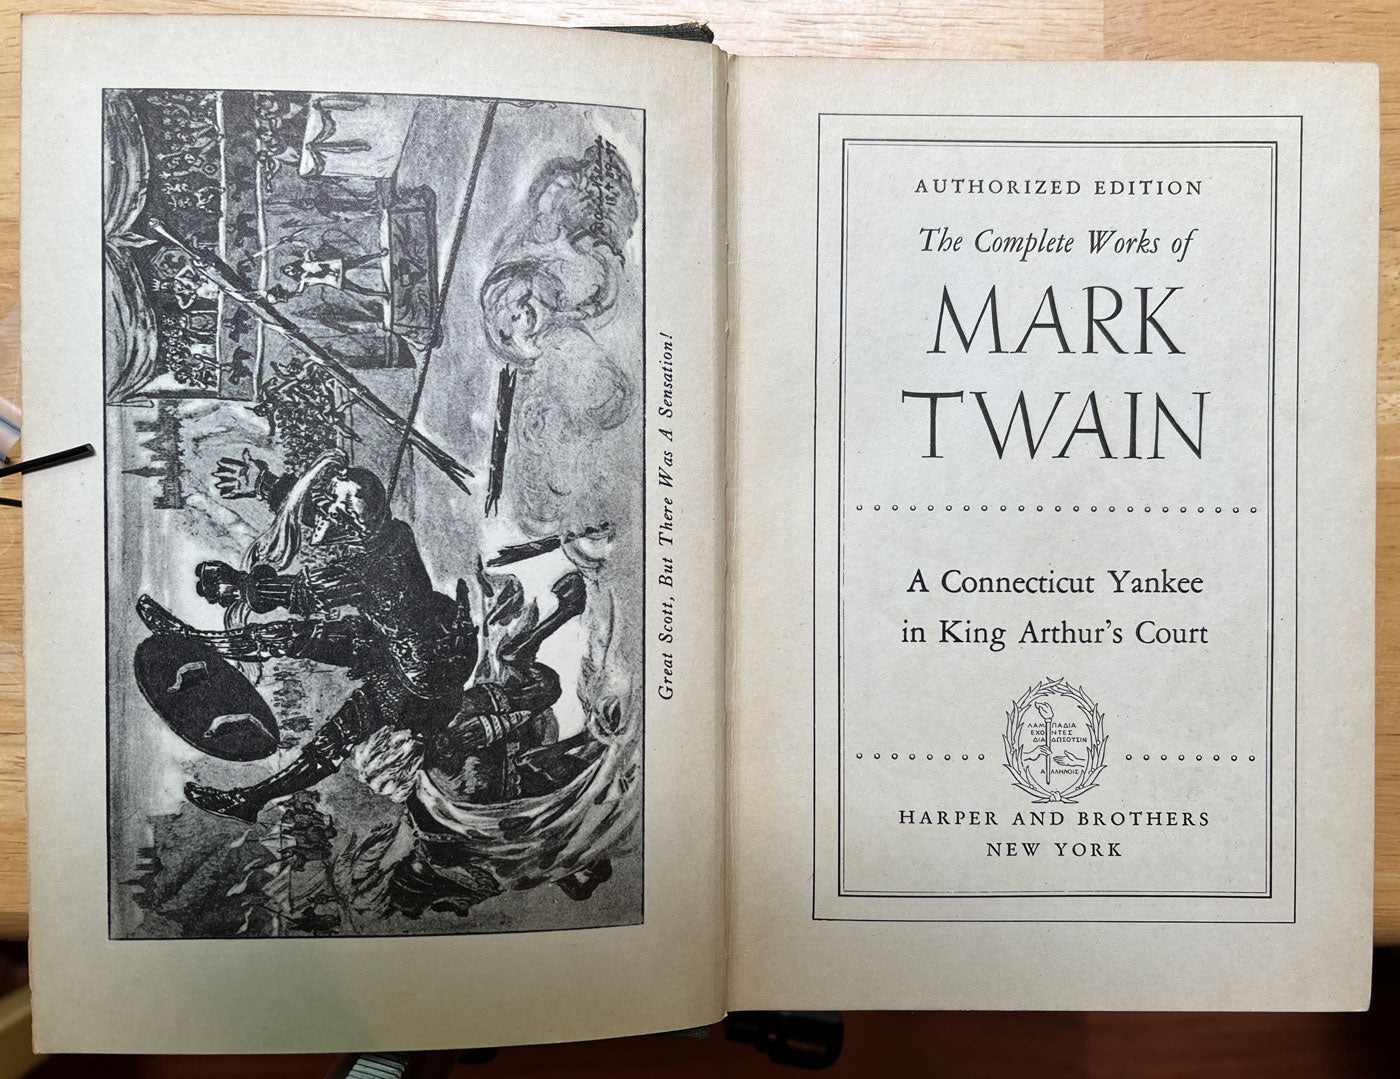 Mark Twain A Connecticut Yankee in King Arthur's Court title page